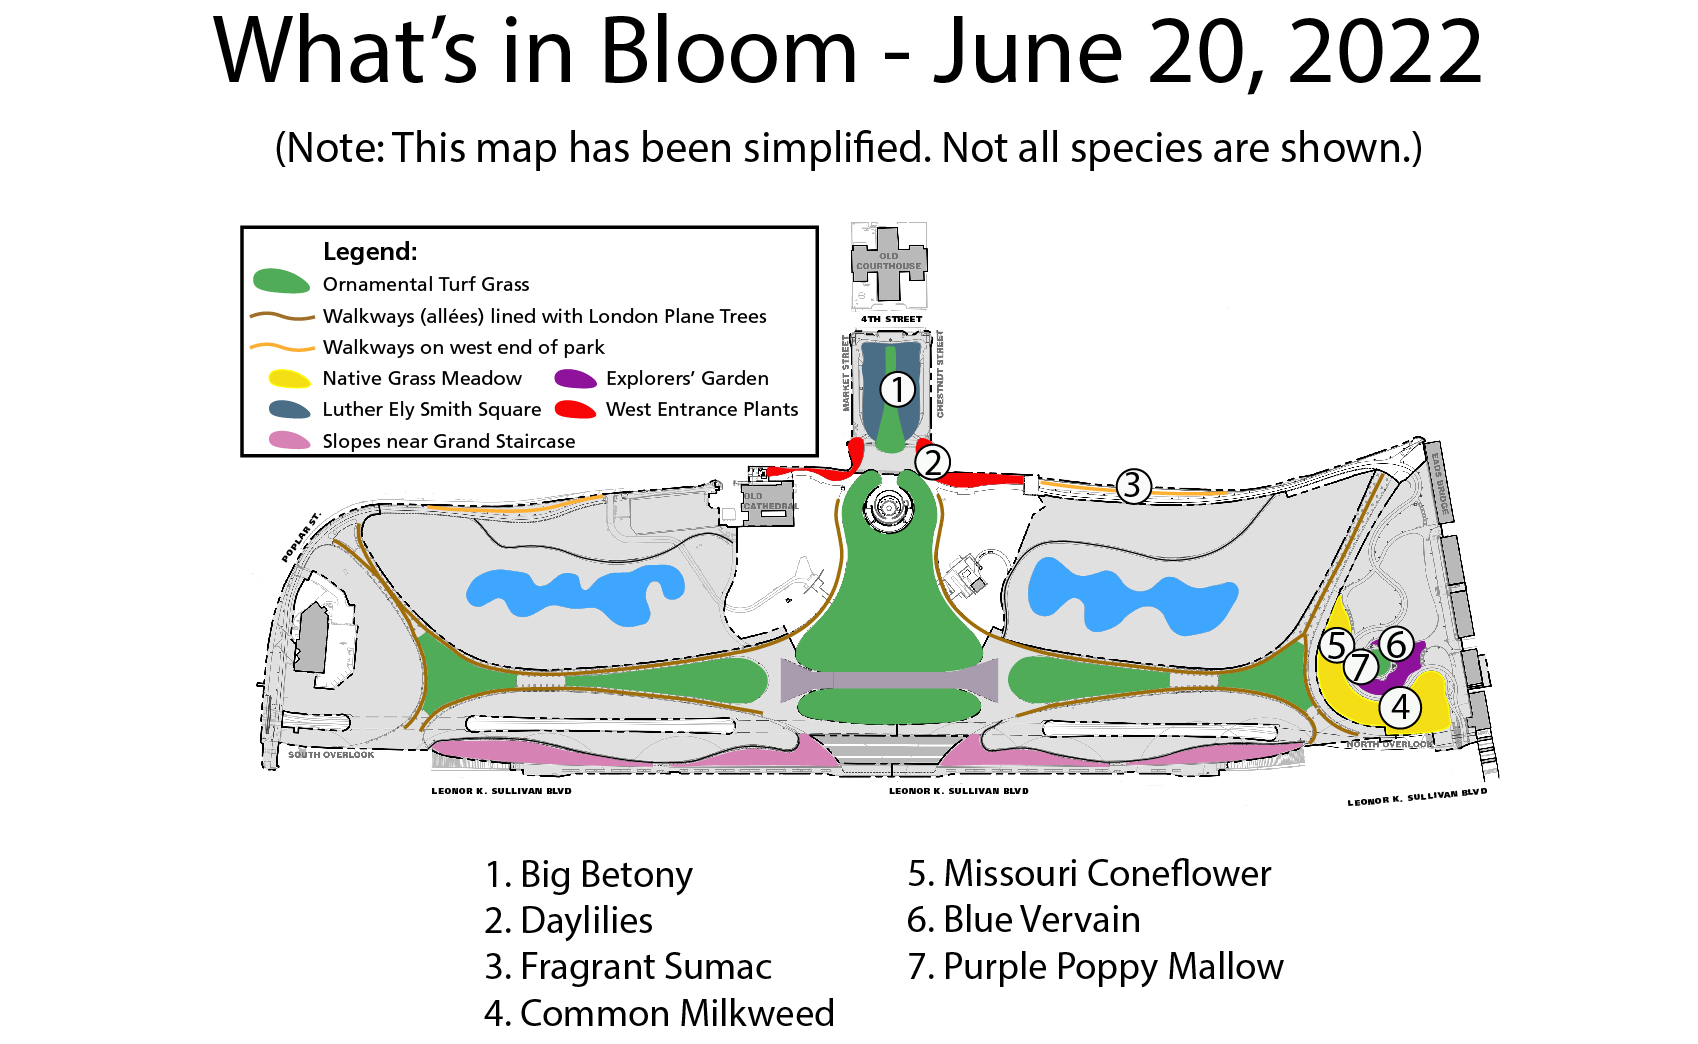 A map with colored areas showing different plant groupings. Circled numbers corresponding to currently blooming plants are spread over the map. A legend is on the bottom.